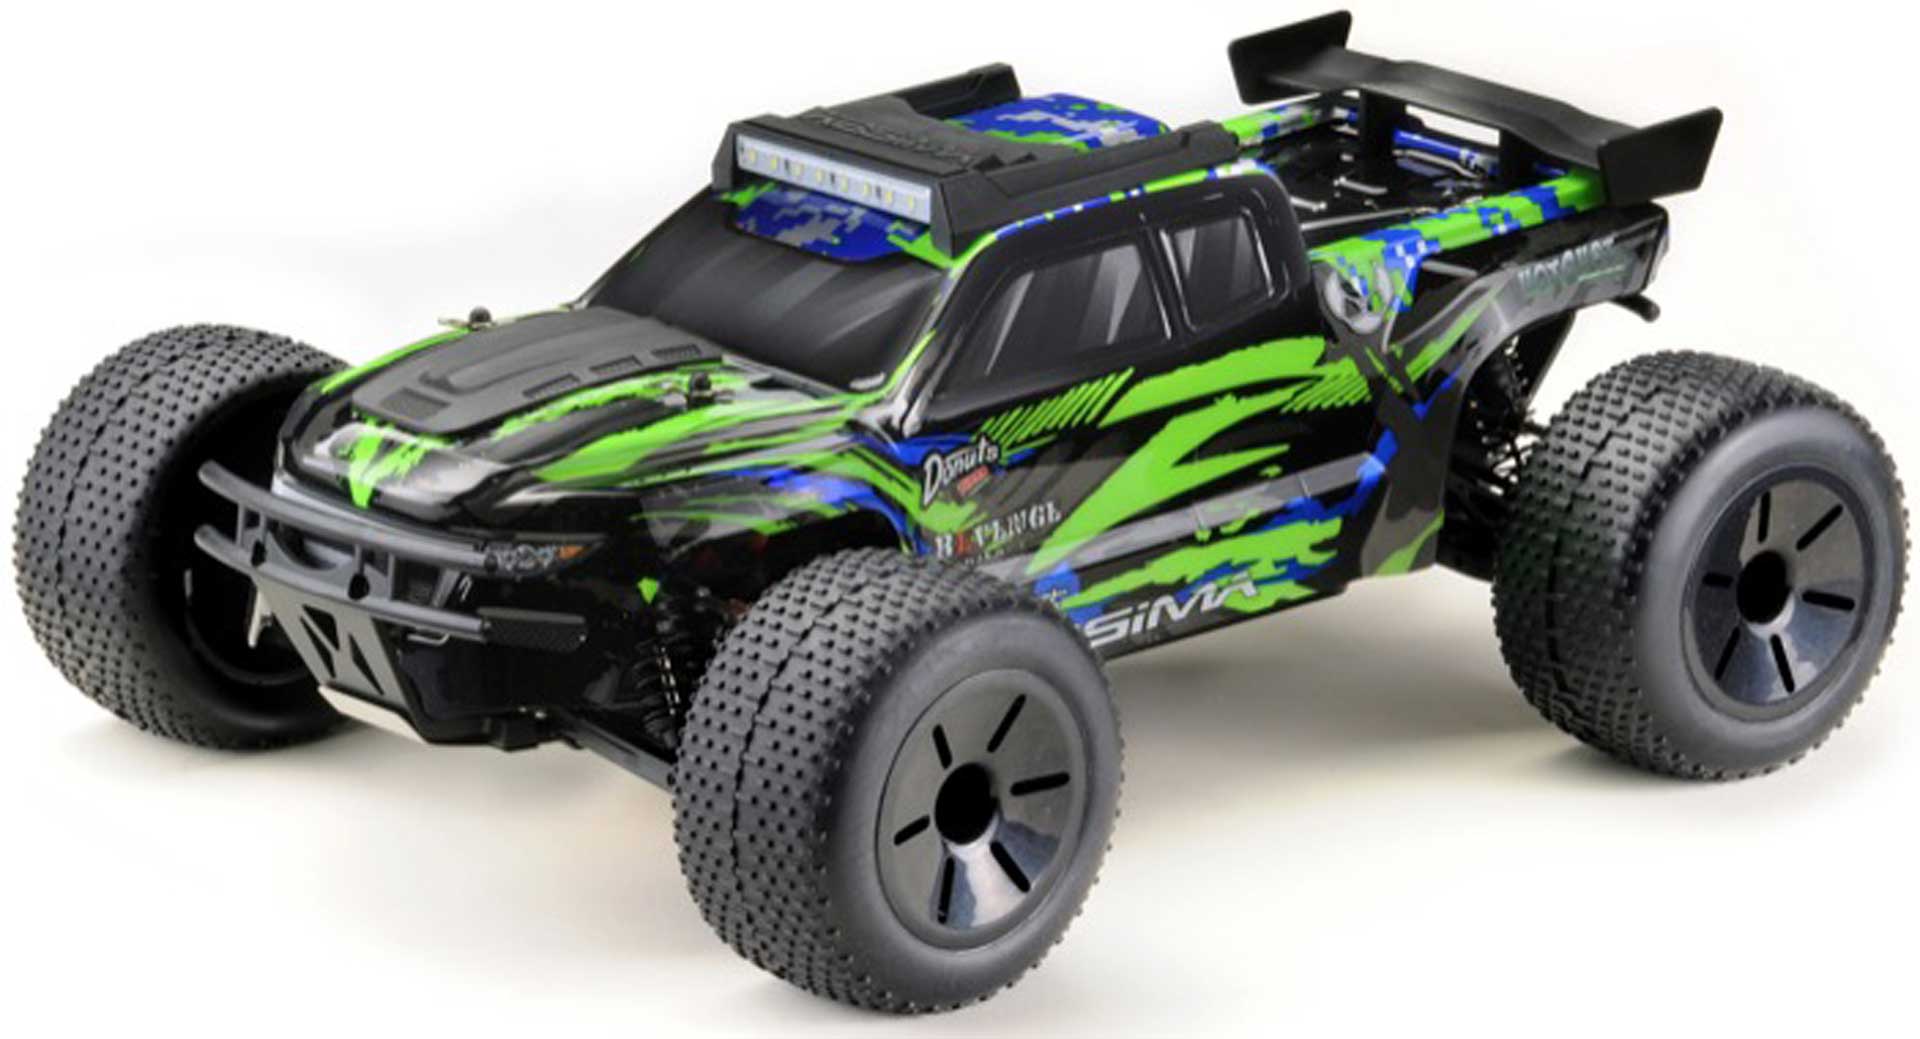 ABSIMA Truggy "AT3.4V2" 1/10 4WD Brushed RTR